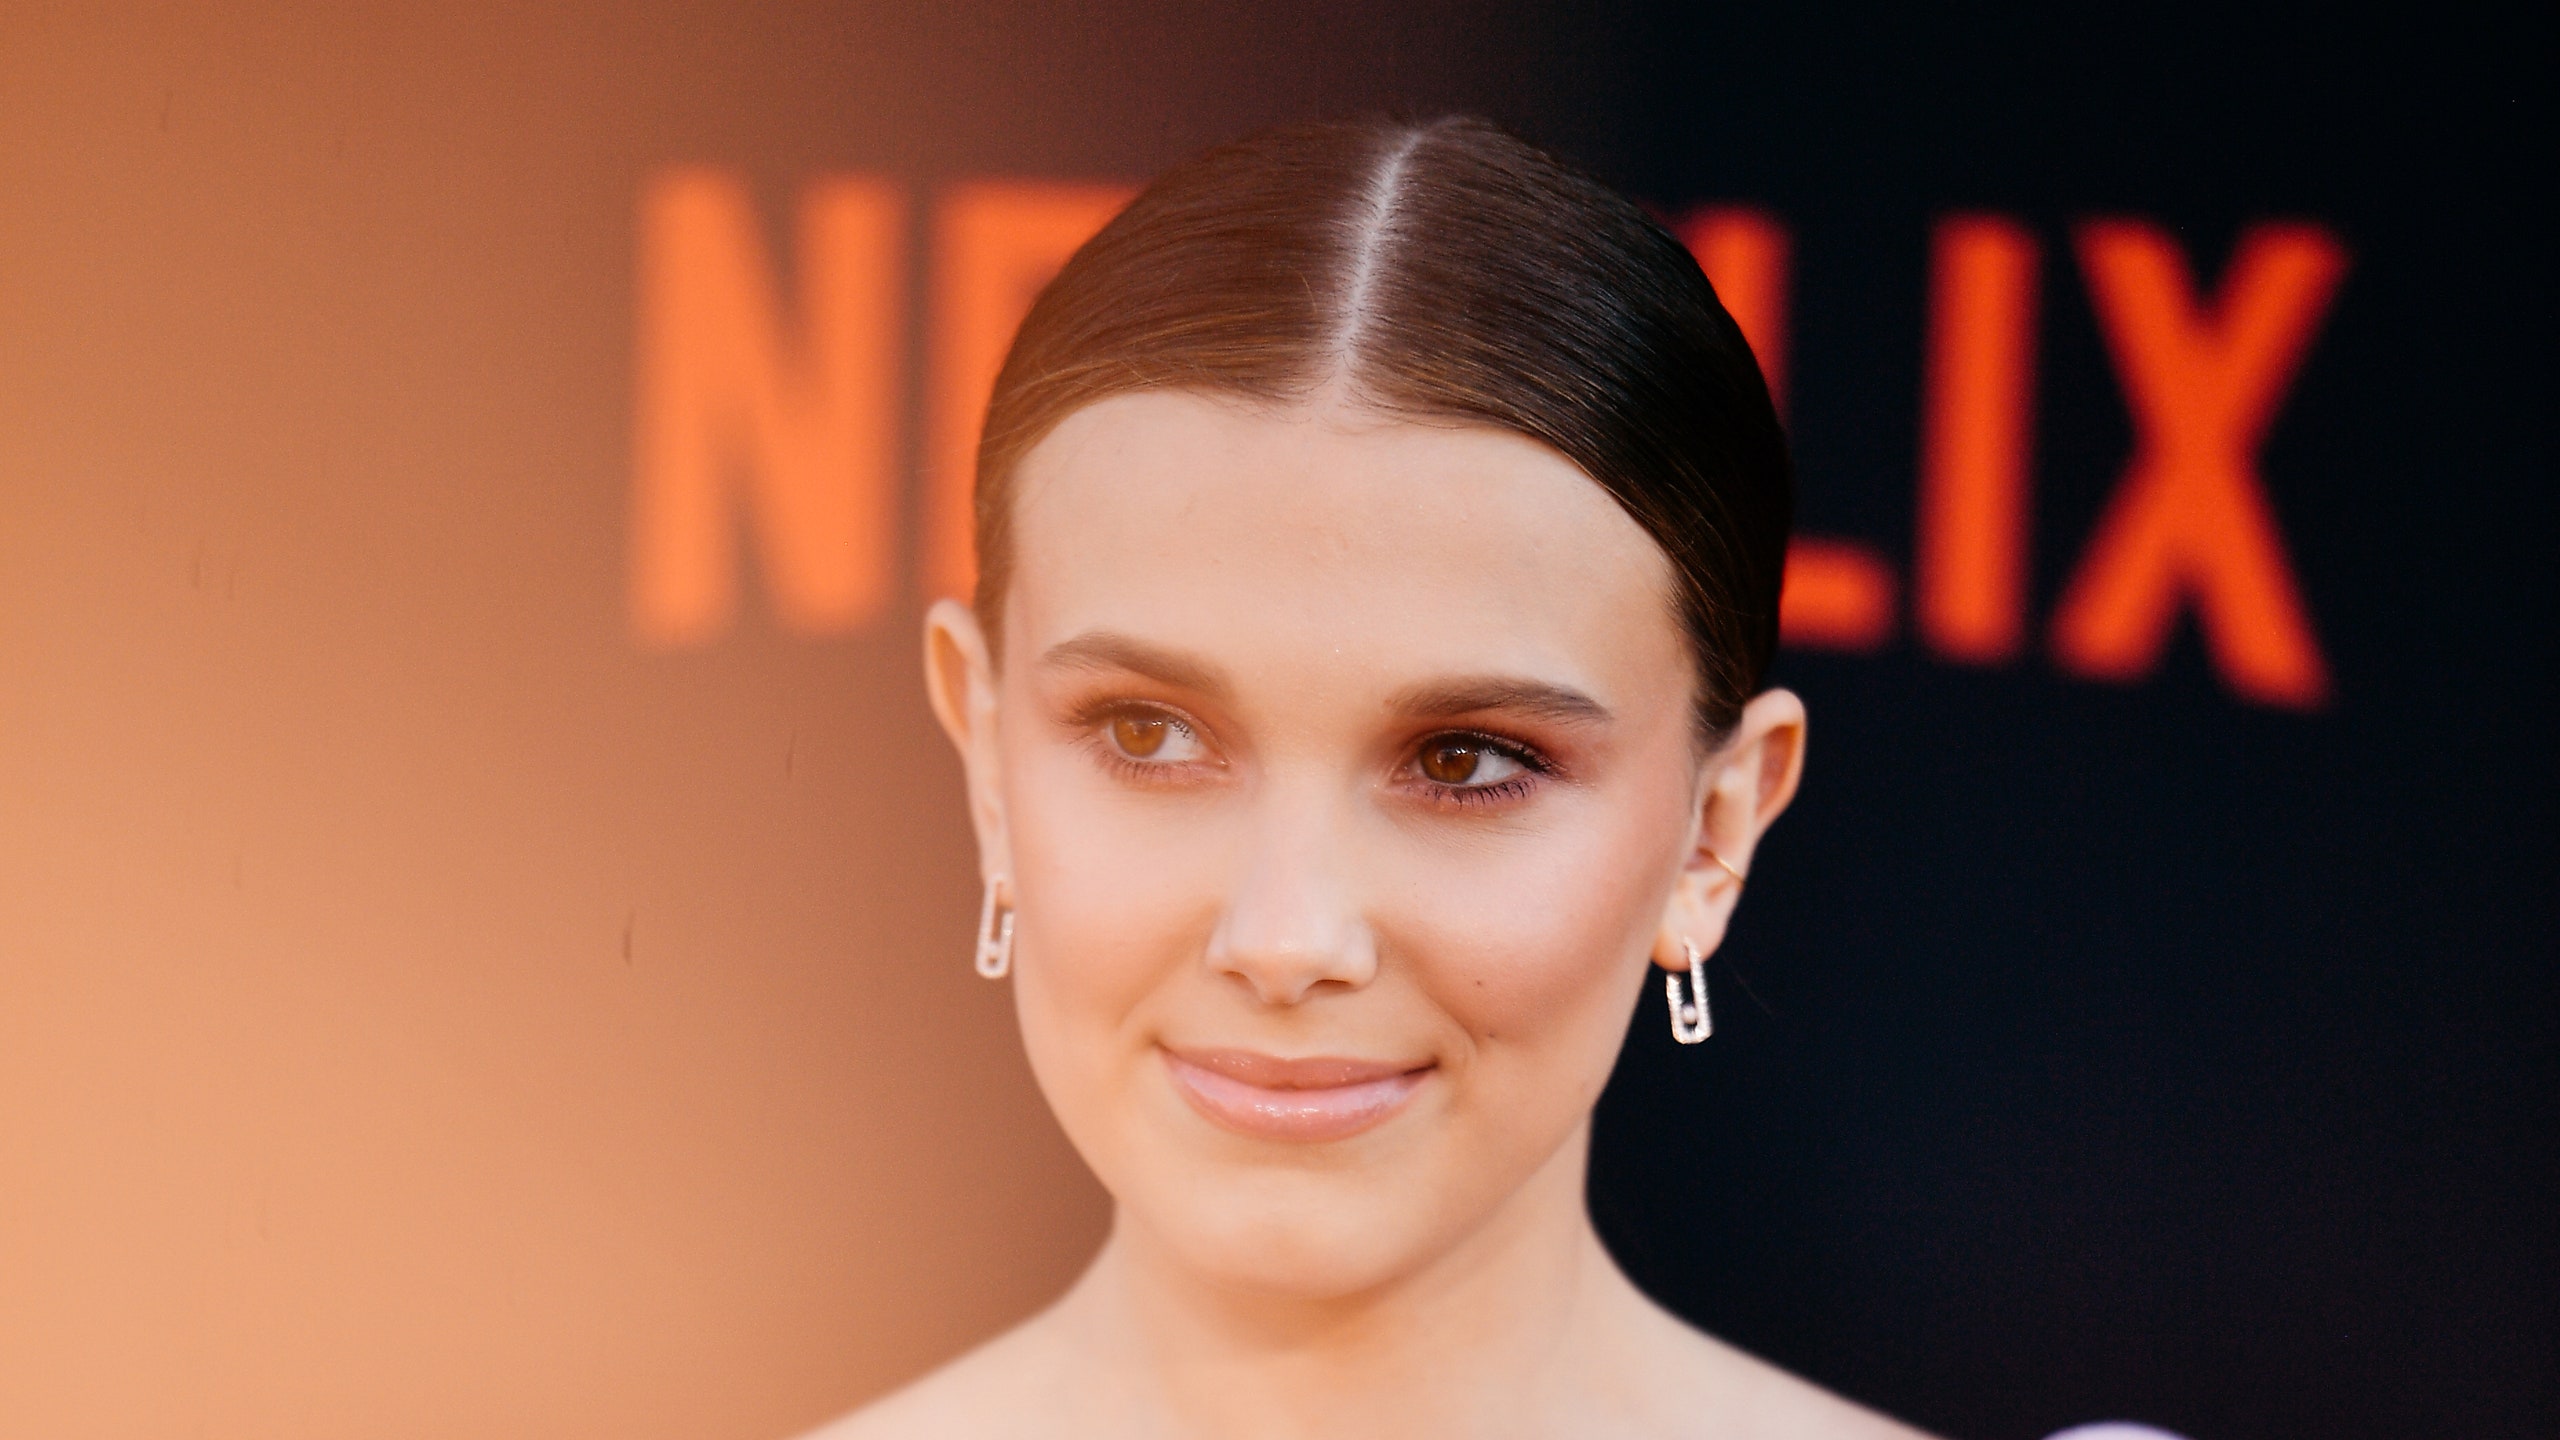 millie bobby brown smiling Wallpapers